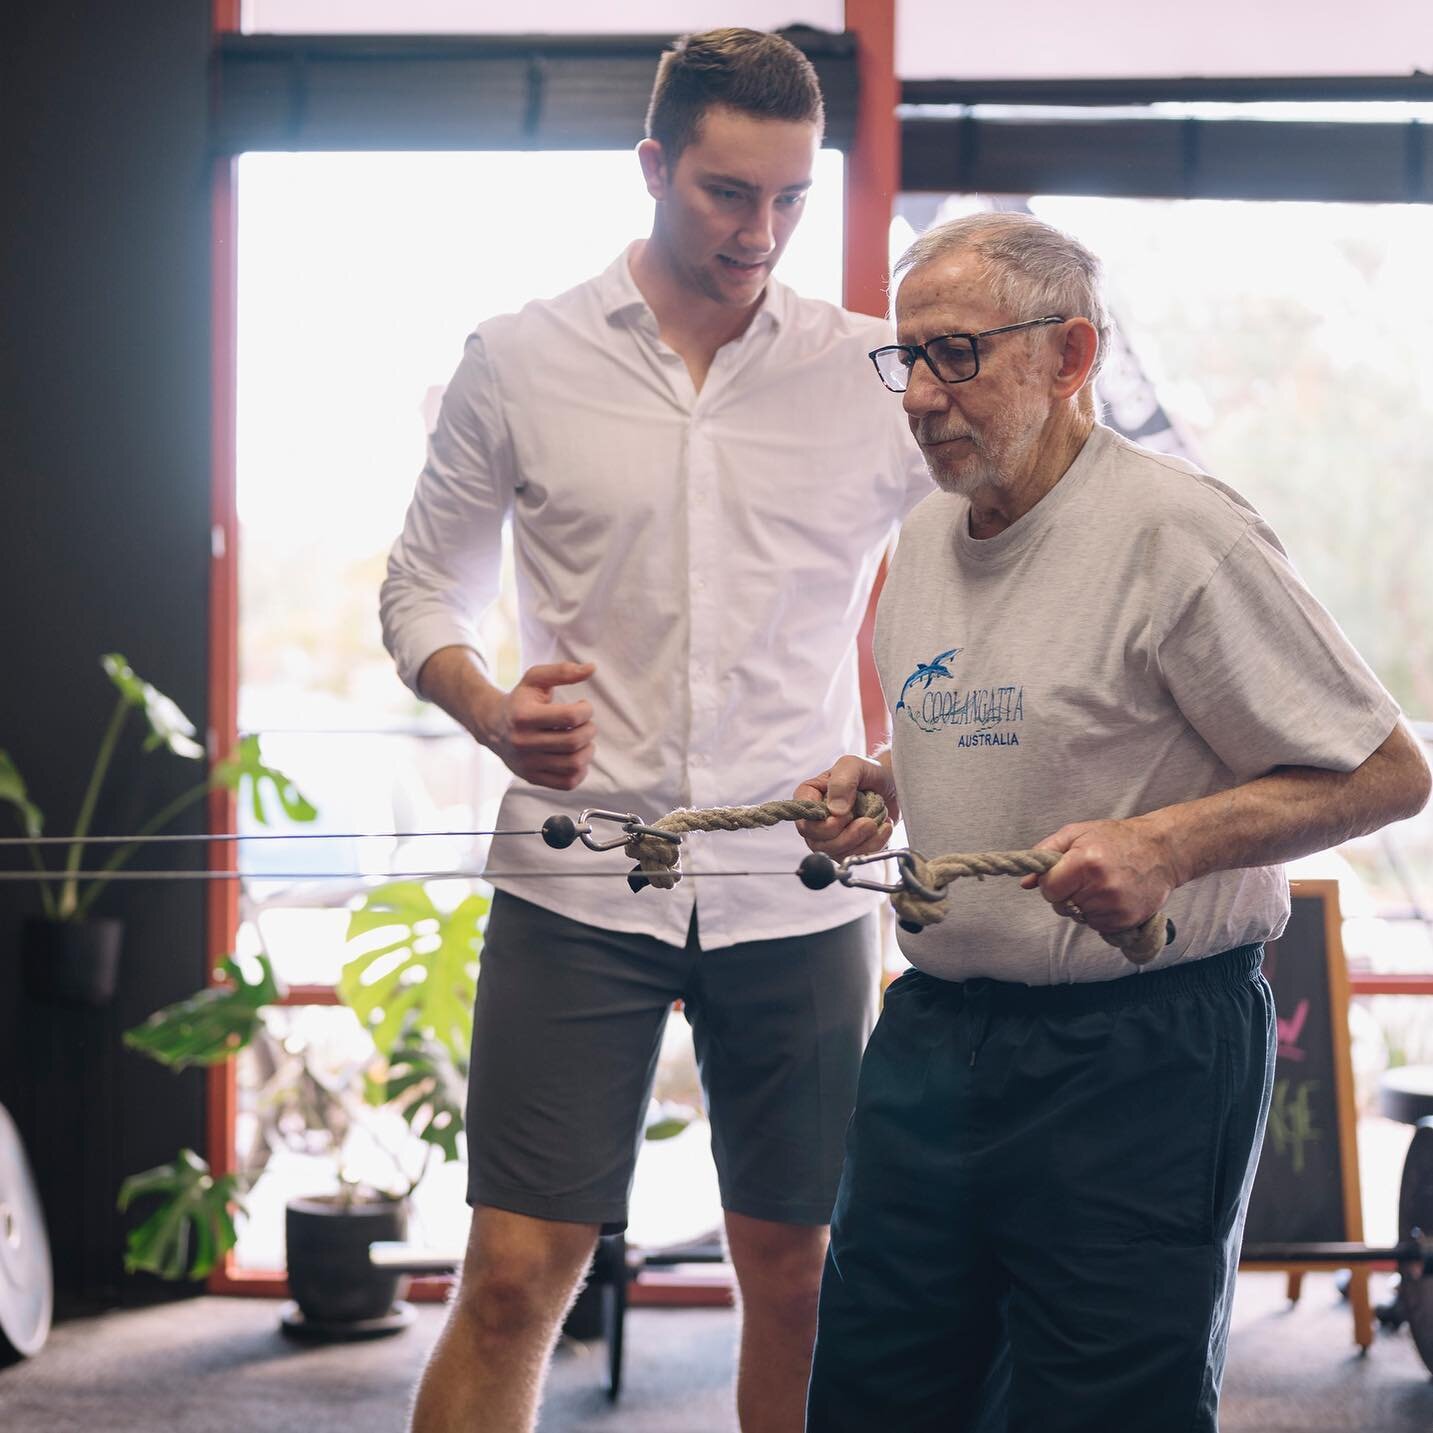 Calling all Veterans! Exercise Thought was granted funds from Australia&rsquo;s Department of Veteran Affairs. This enables us to provide affordable (and FREE) services to Veterans. Get stronger. Improve balance. Reduce the impact of falling. No matt